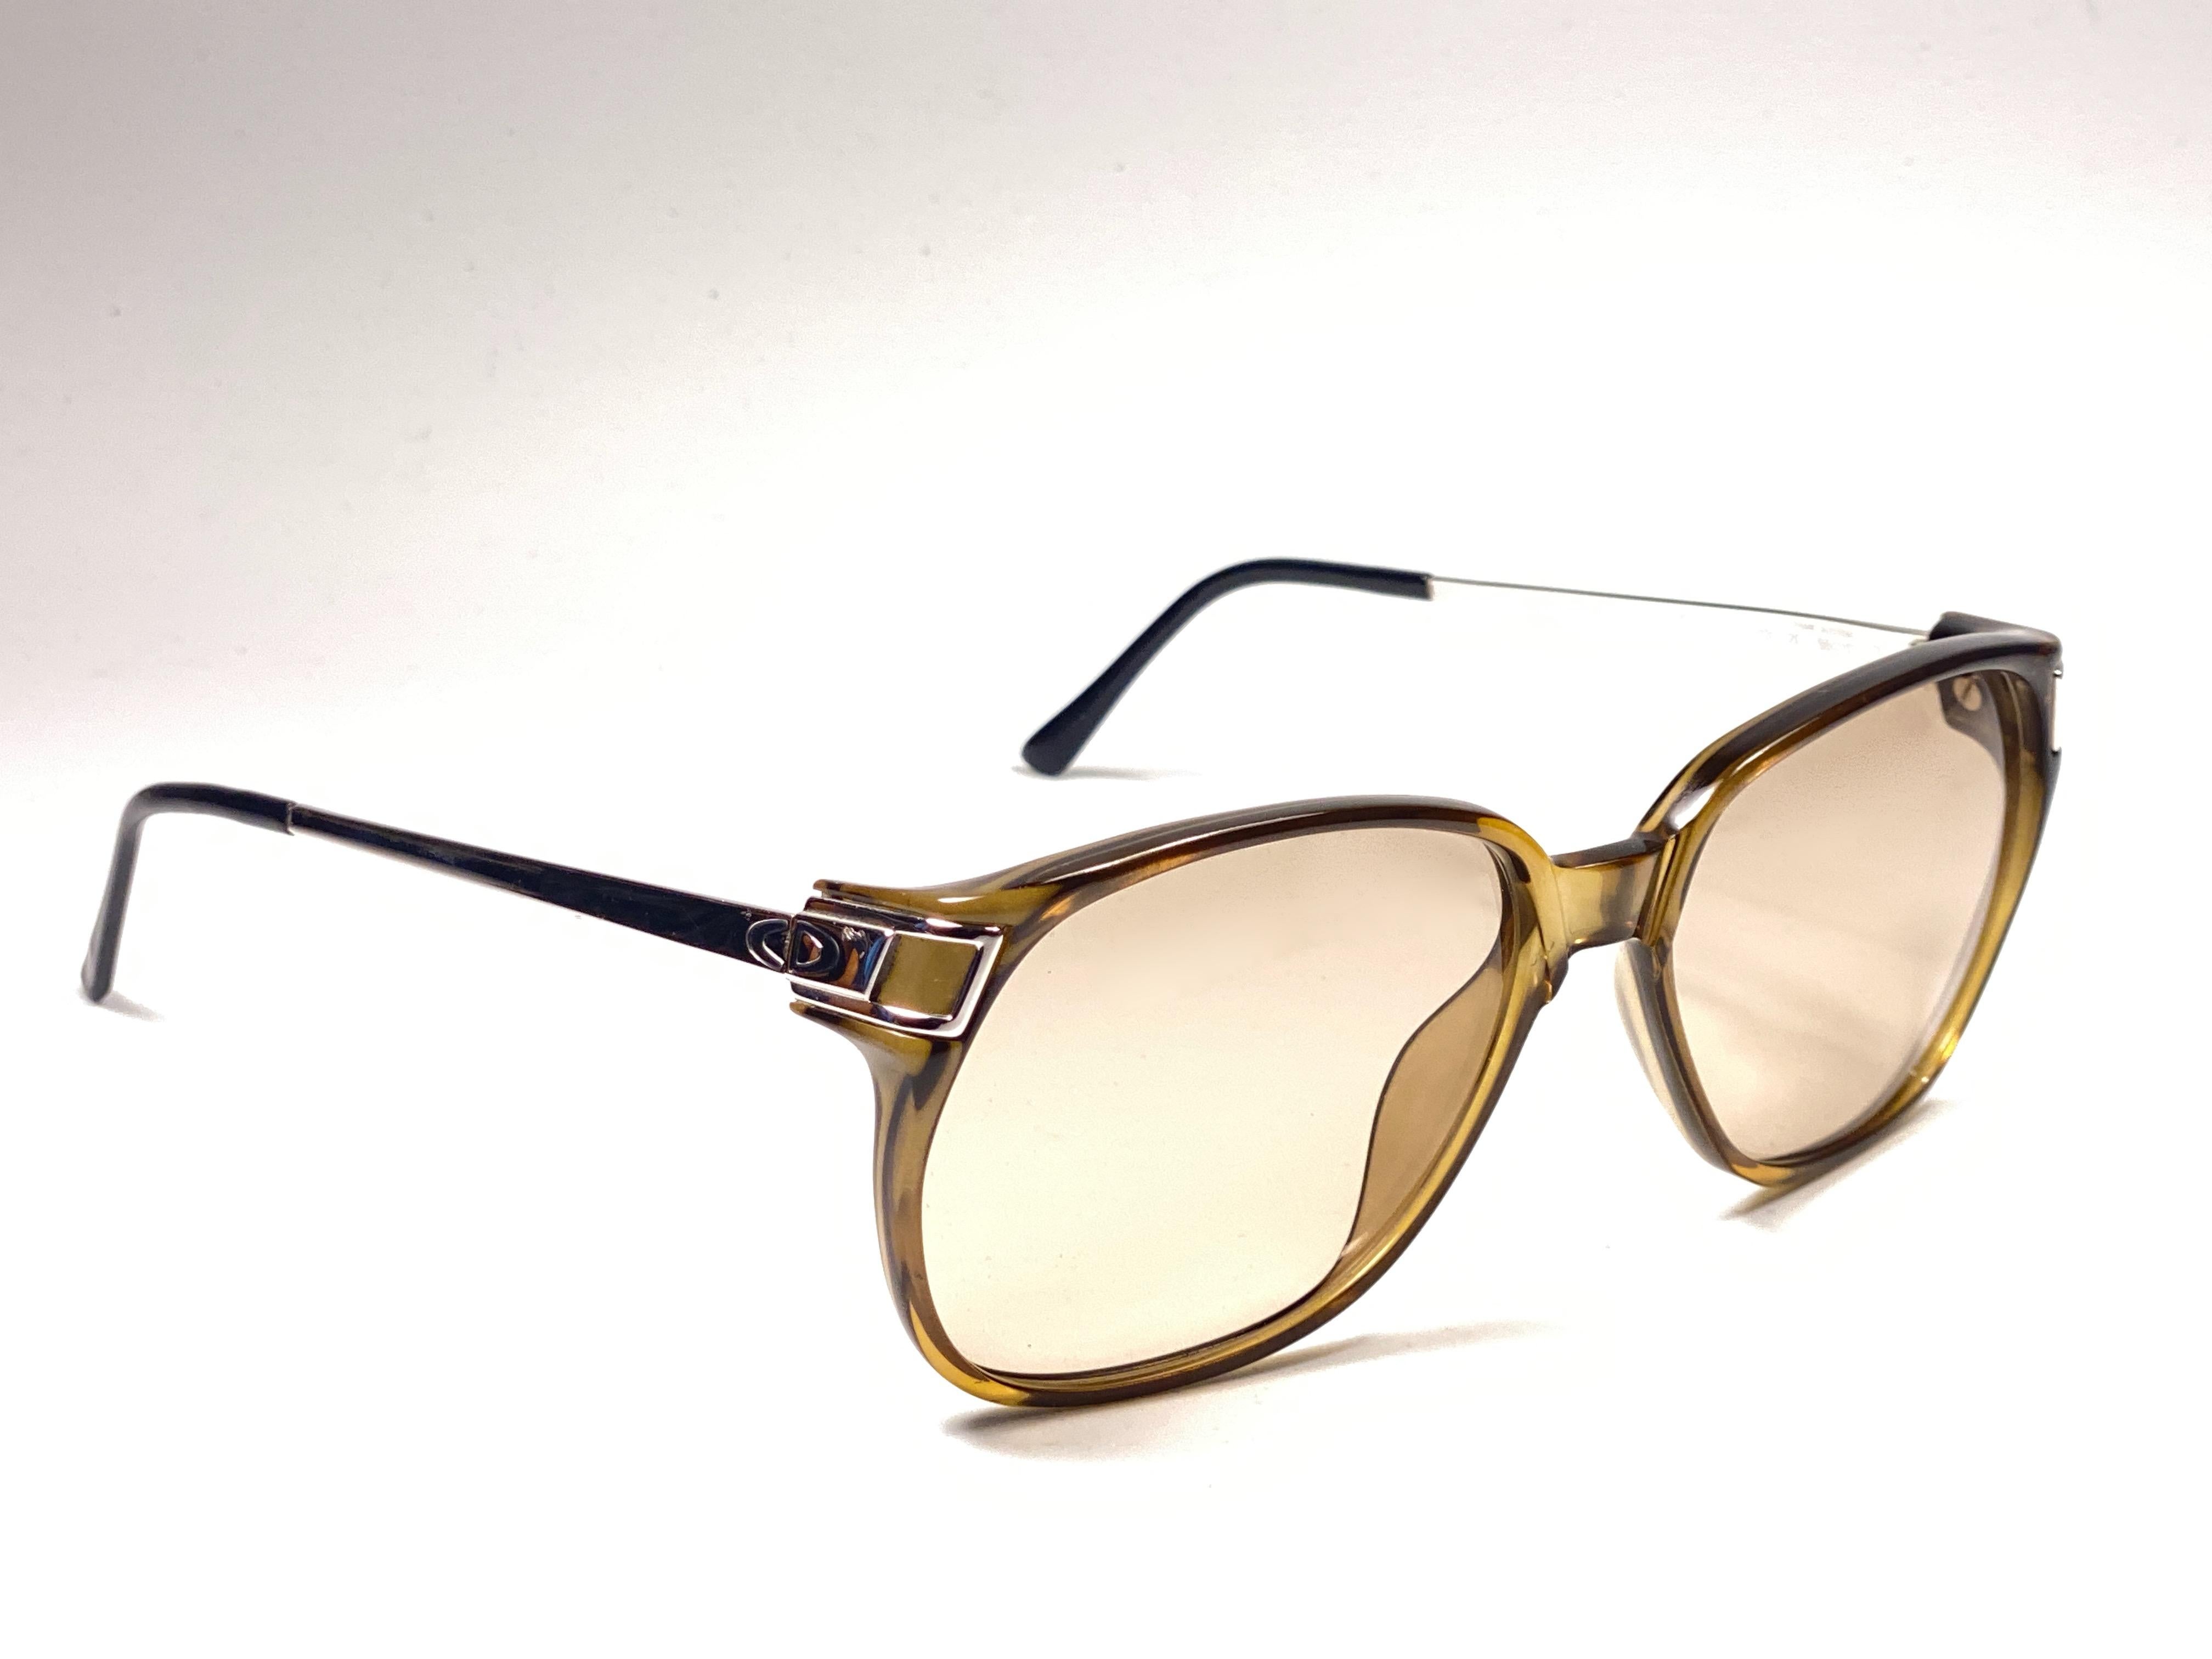 New vintage Christian Dior Monsieur translucent green frame.

Spotless light brown lenses.

New, never worn or displayed this item may show light sign of wear due to storage.

Made in Austria

Front : 14 cms

Lens Height : 4.6 cms

Lens Width : 5.8